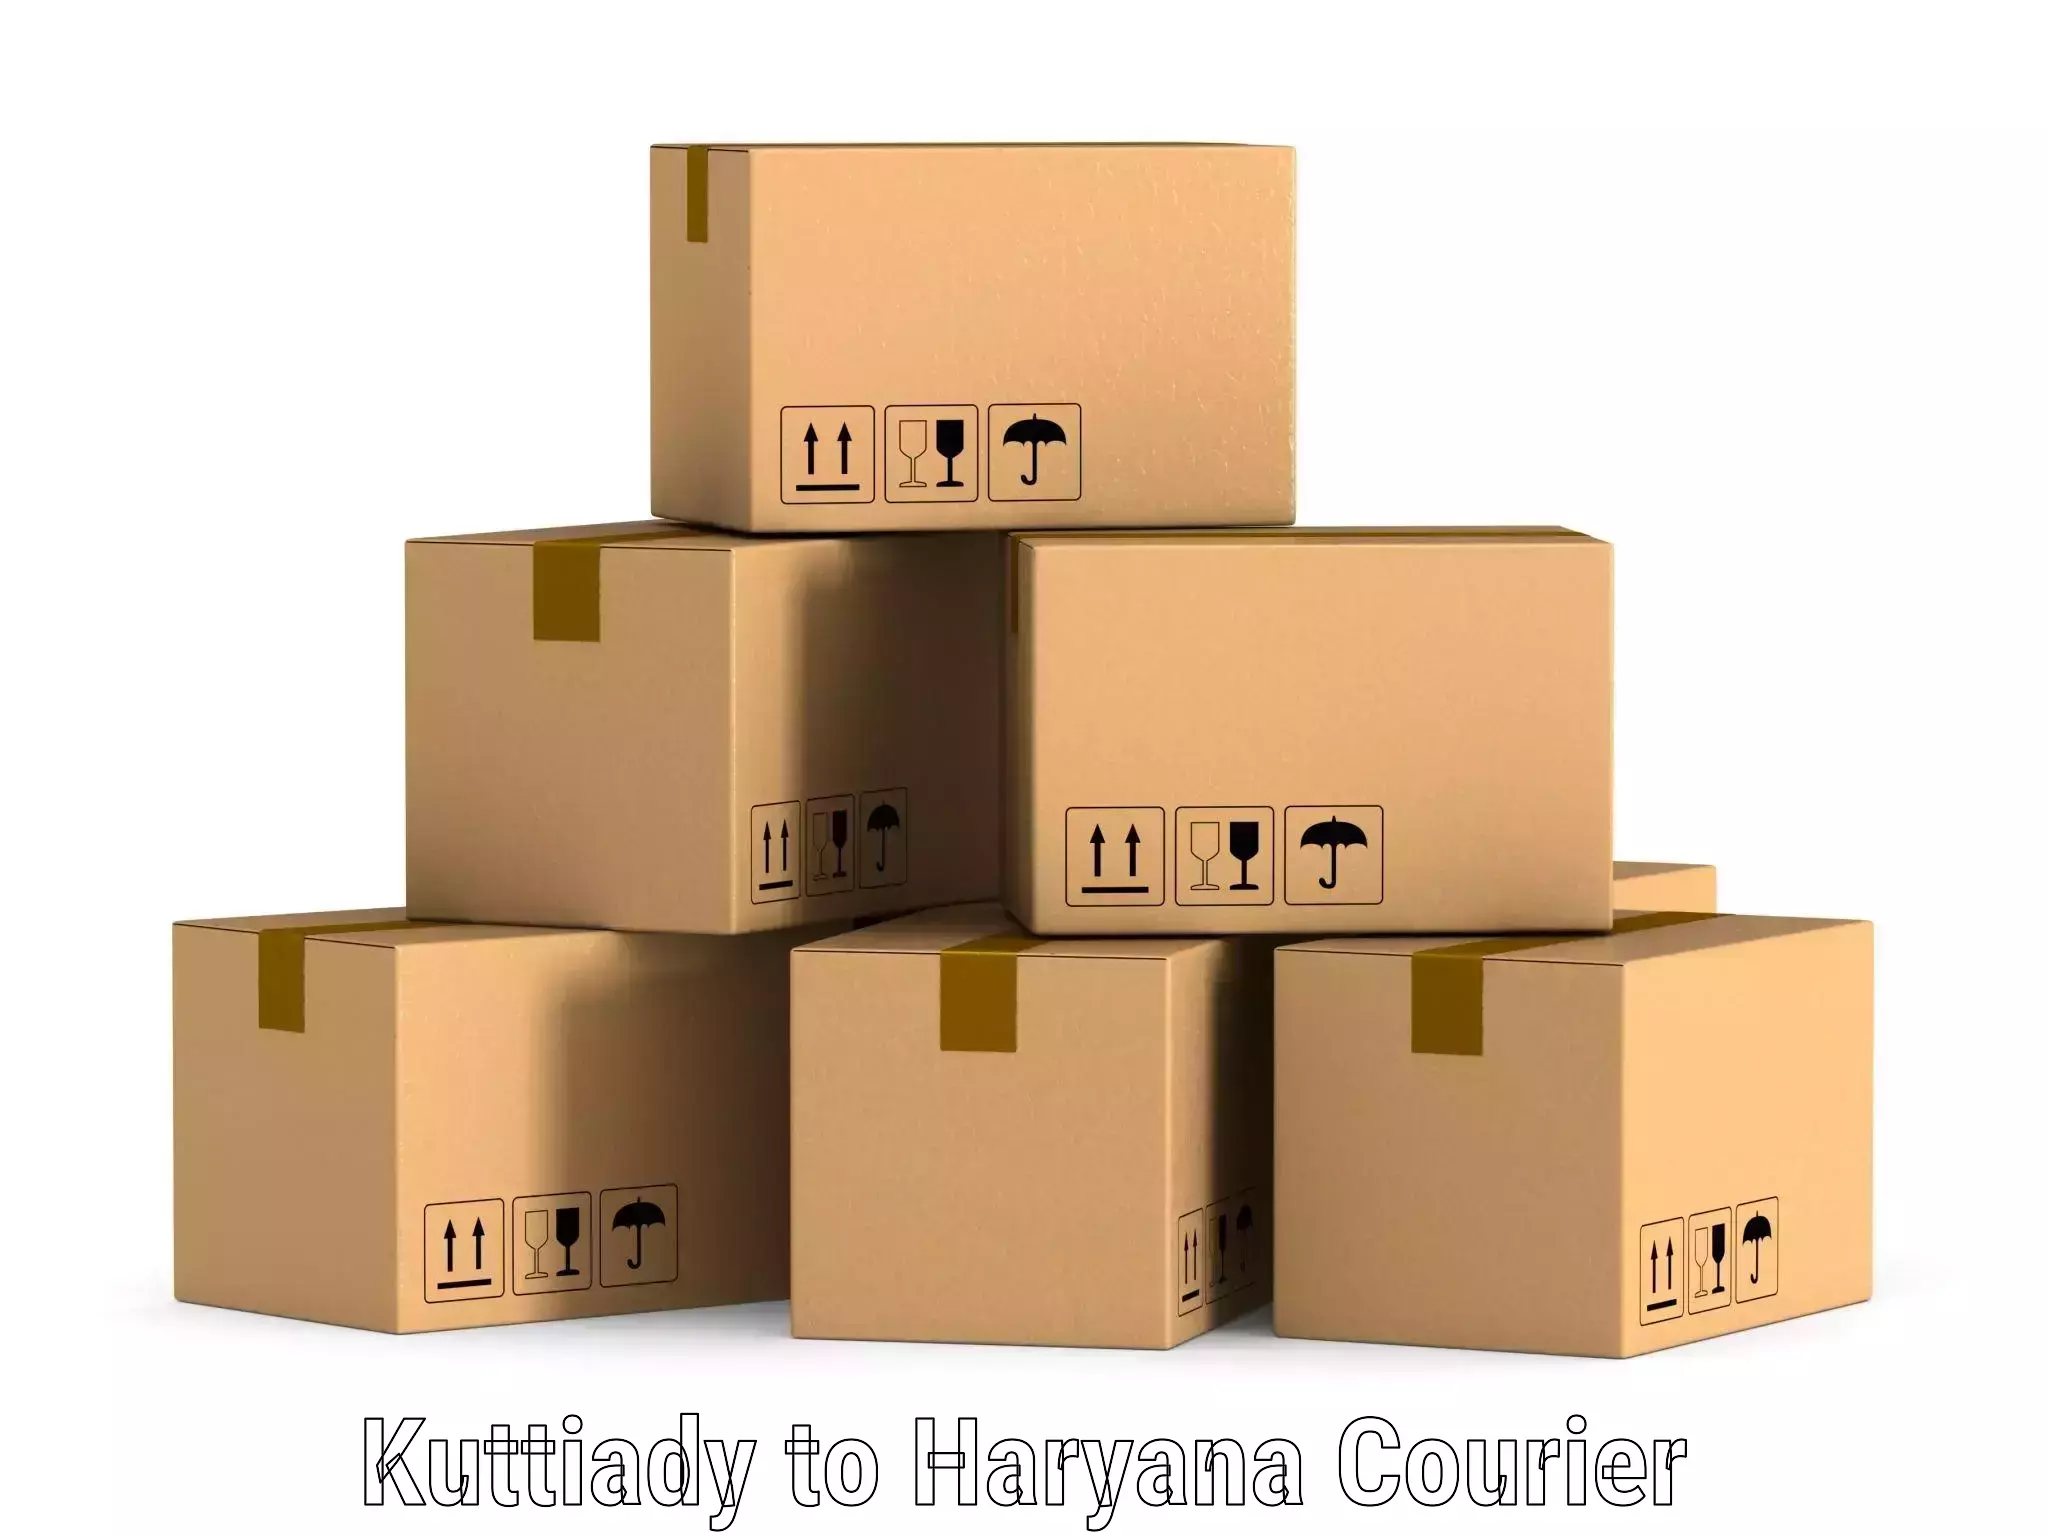 Nationwide shipping coverage Kuttiady to Odhan